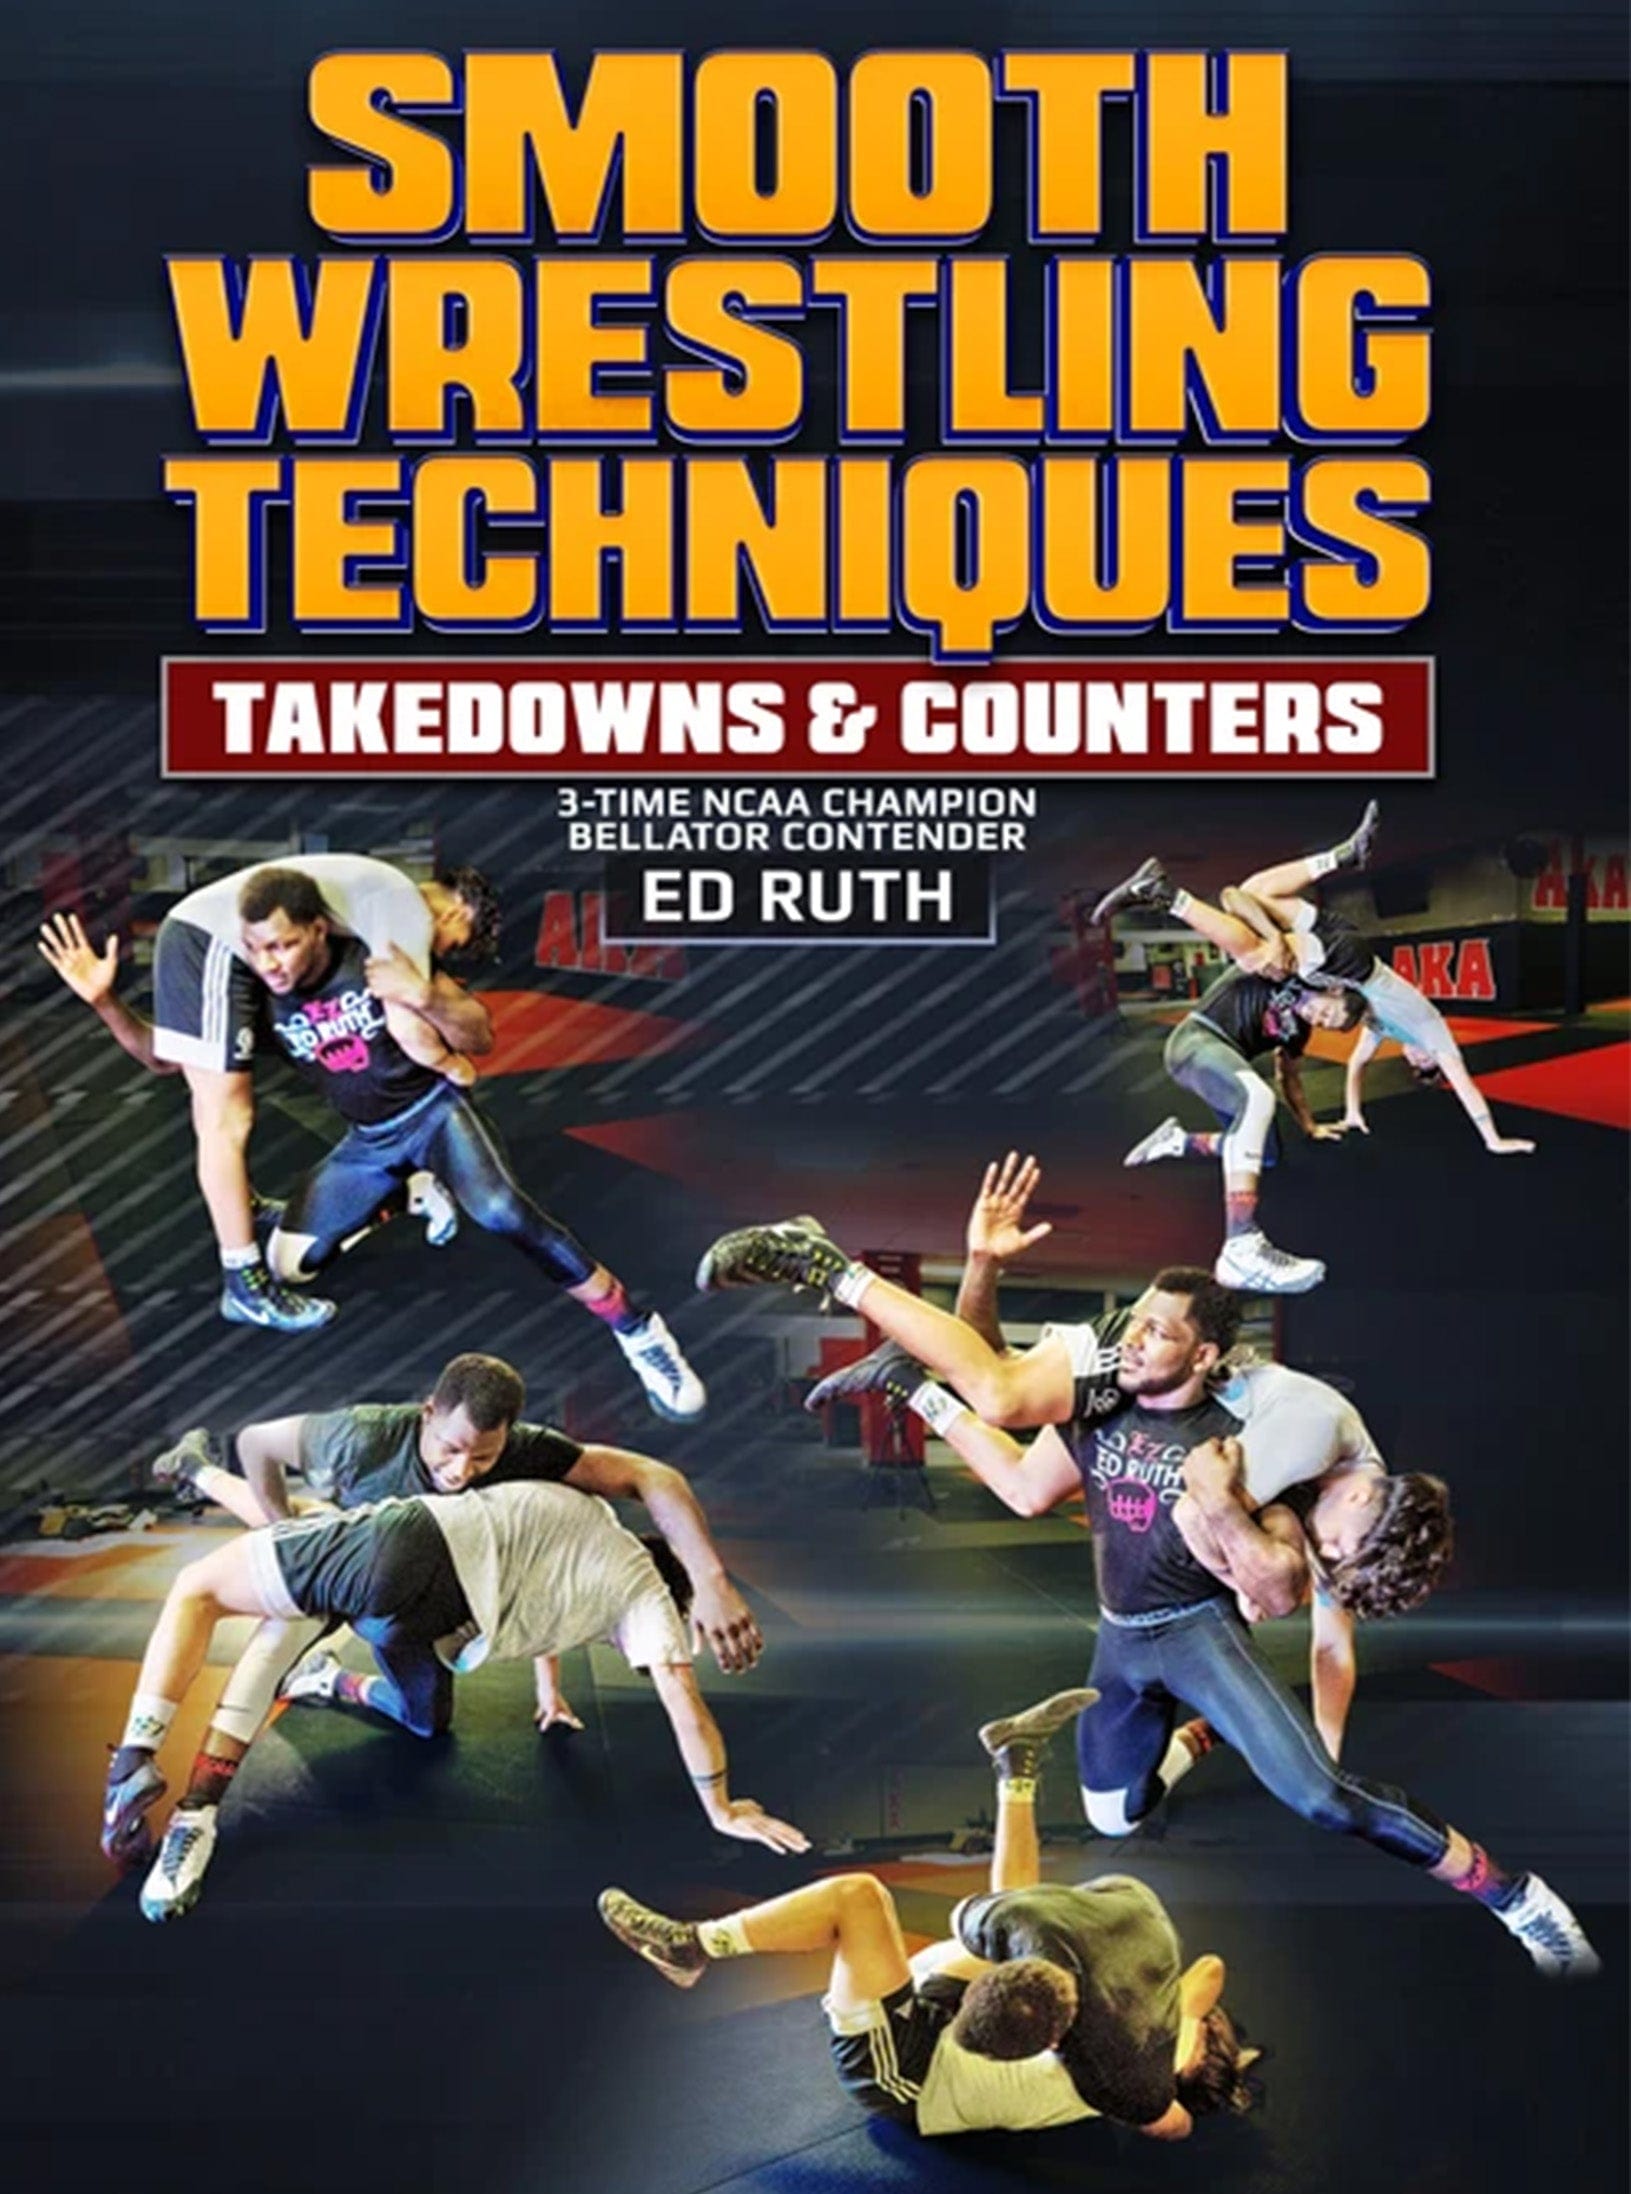 Smooth Wrestling Techniques by Ed Ruth - Fanatic Wrestling